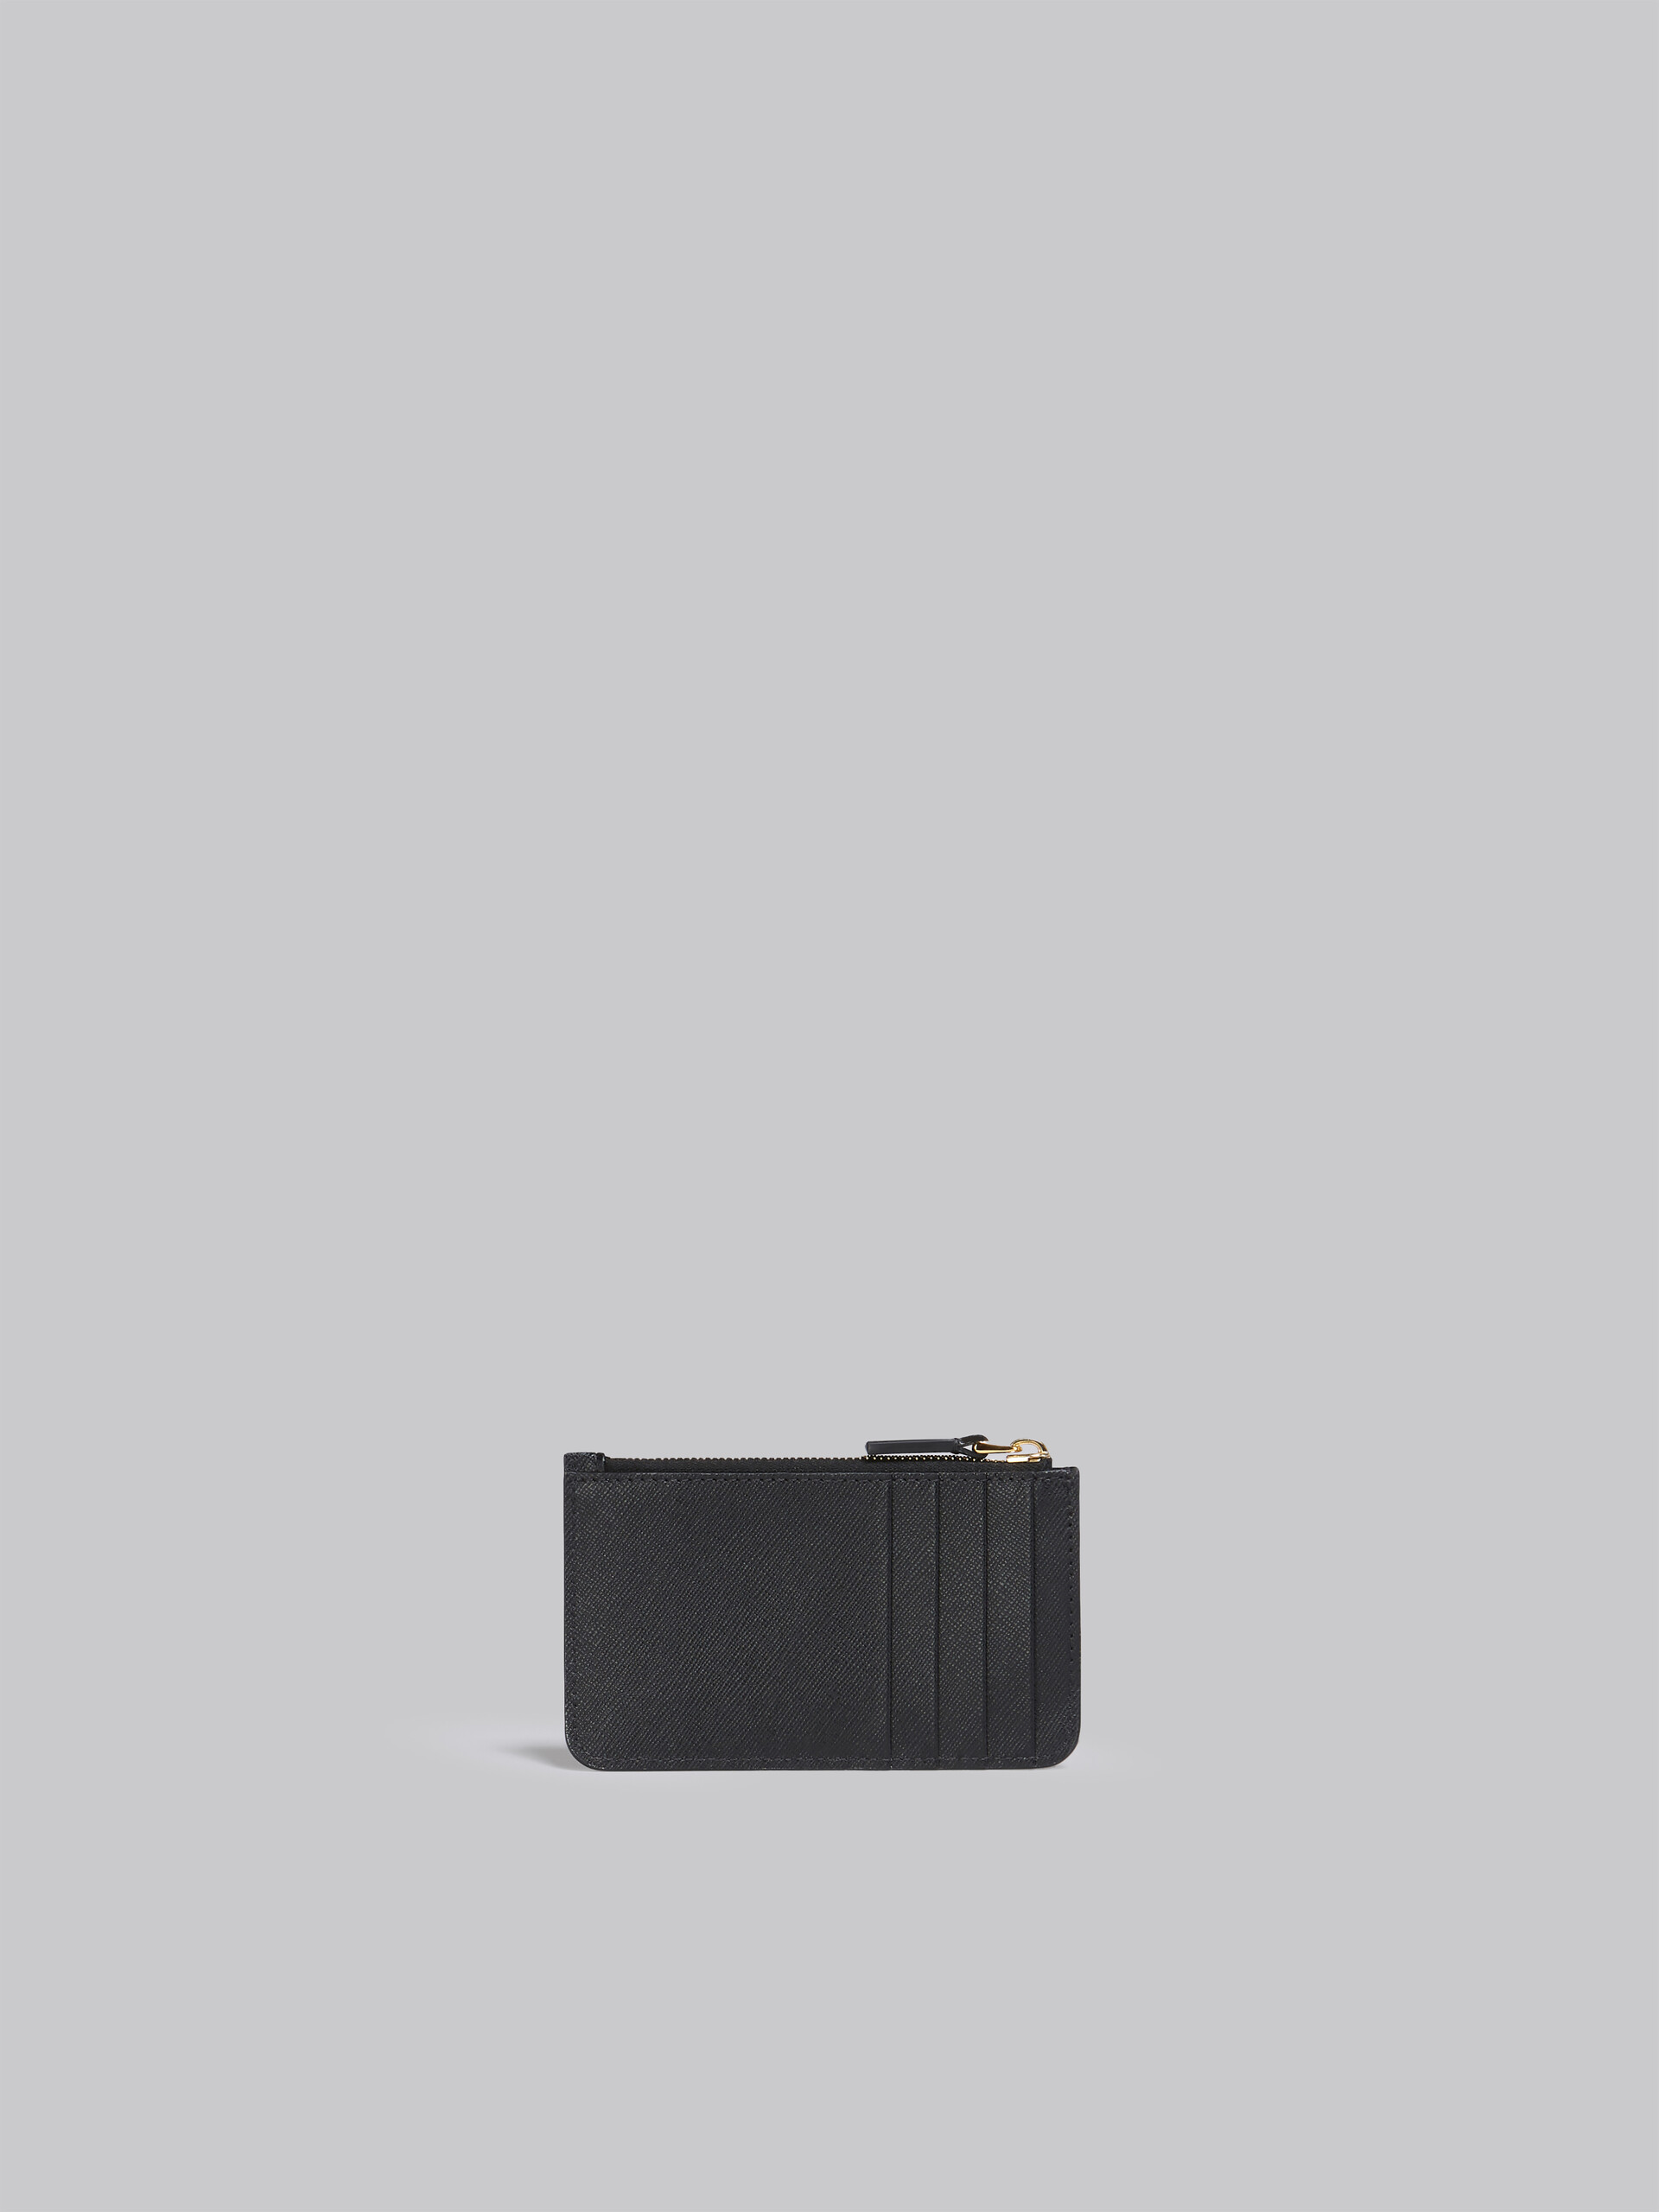 Saffiano leather card case - Wallets - Image 3